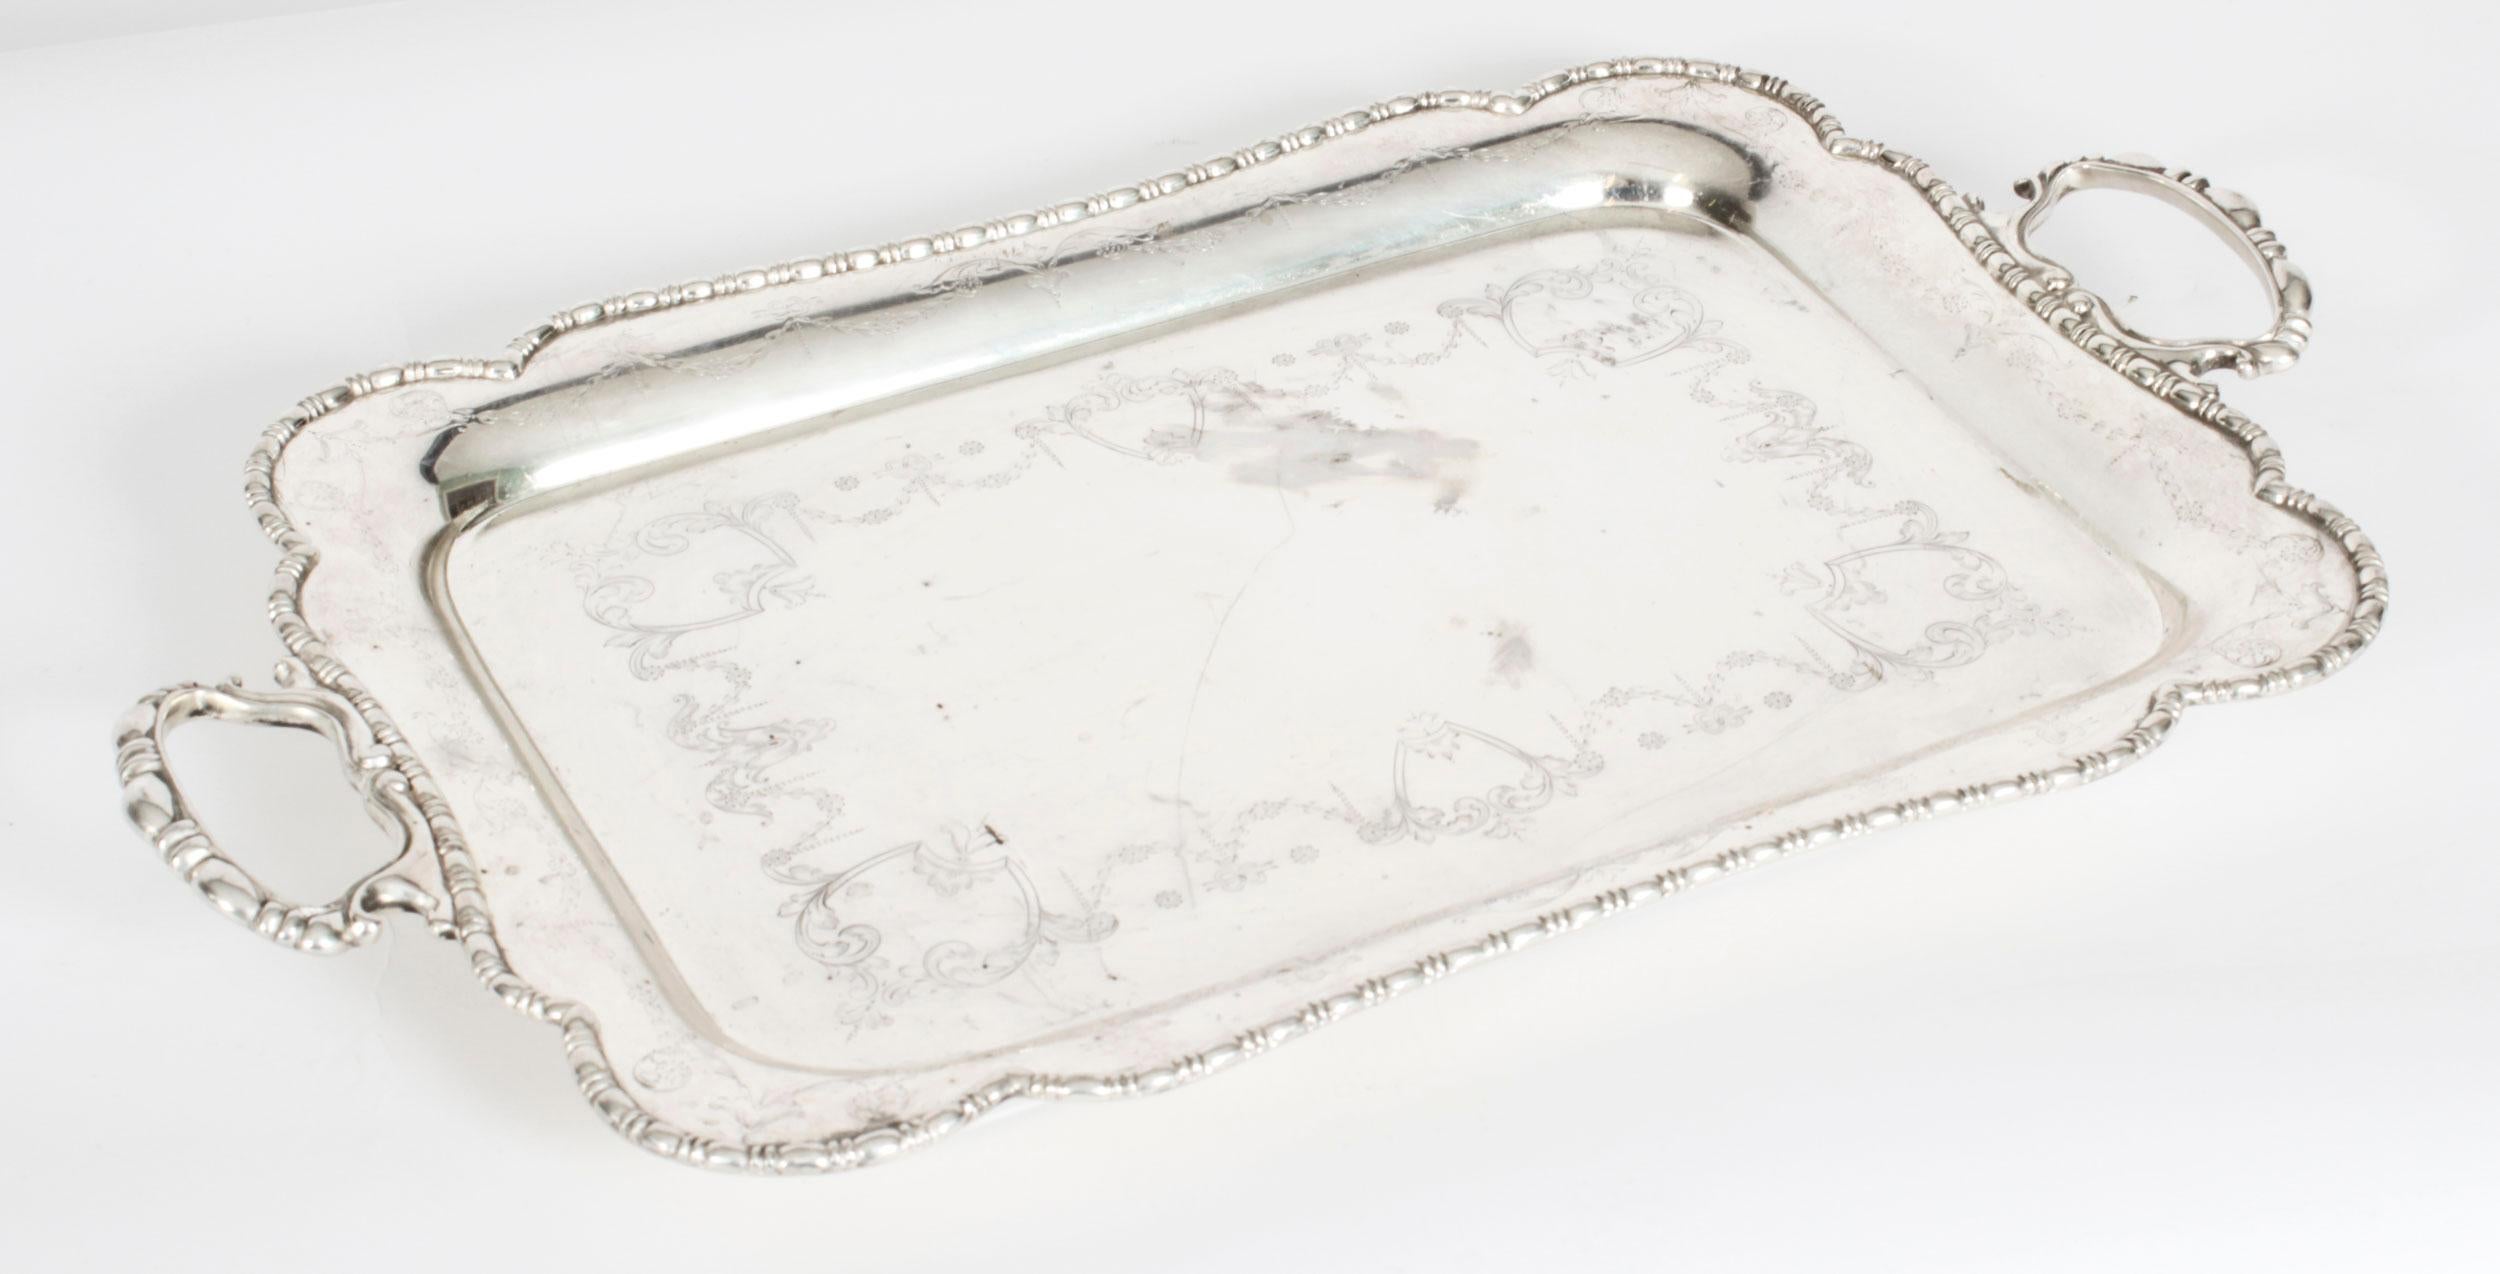 Antique English Neoclassical Silver Plate Tray James Deakin 19th Century For Sale 3